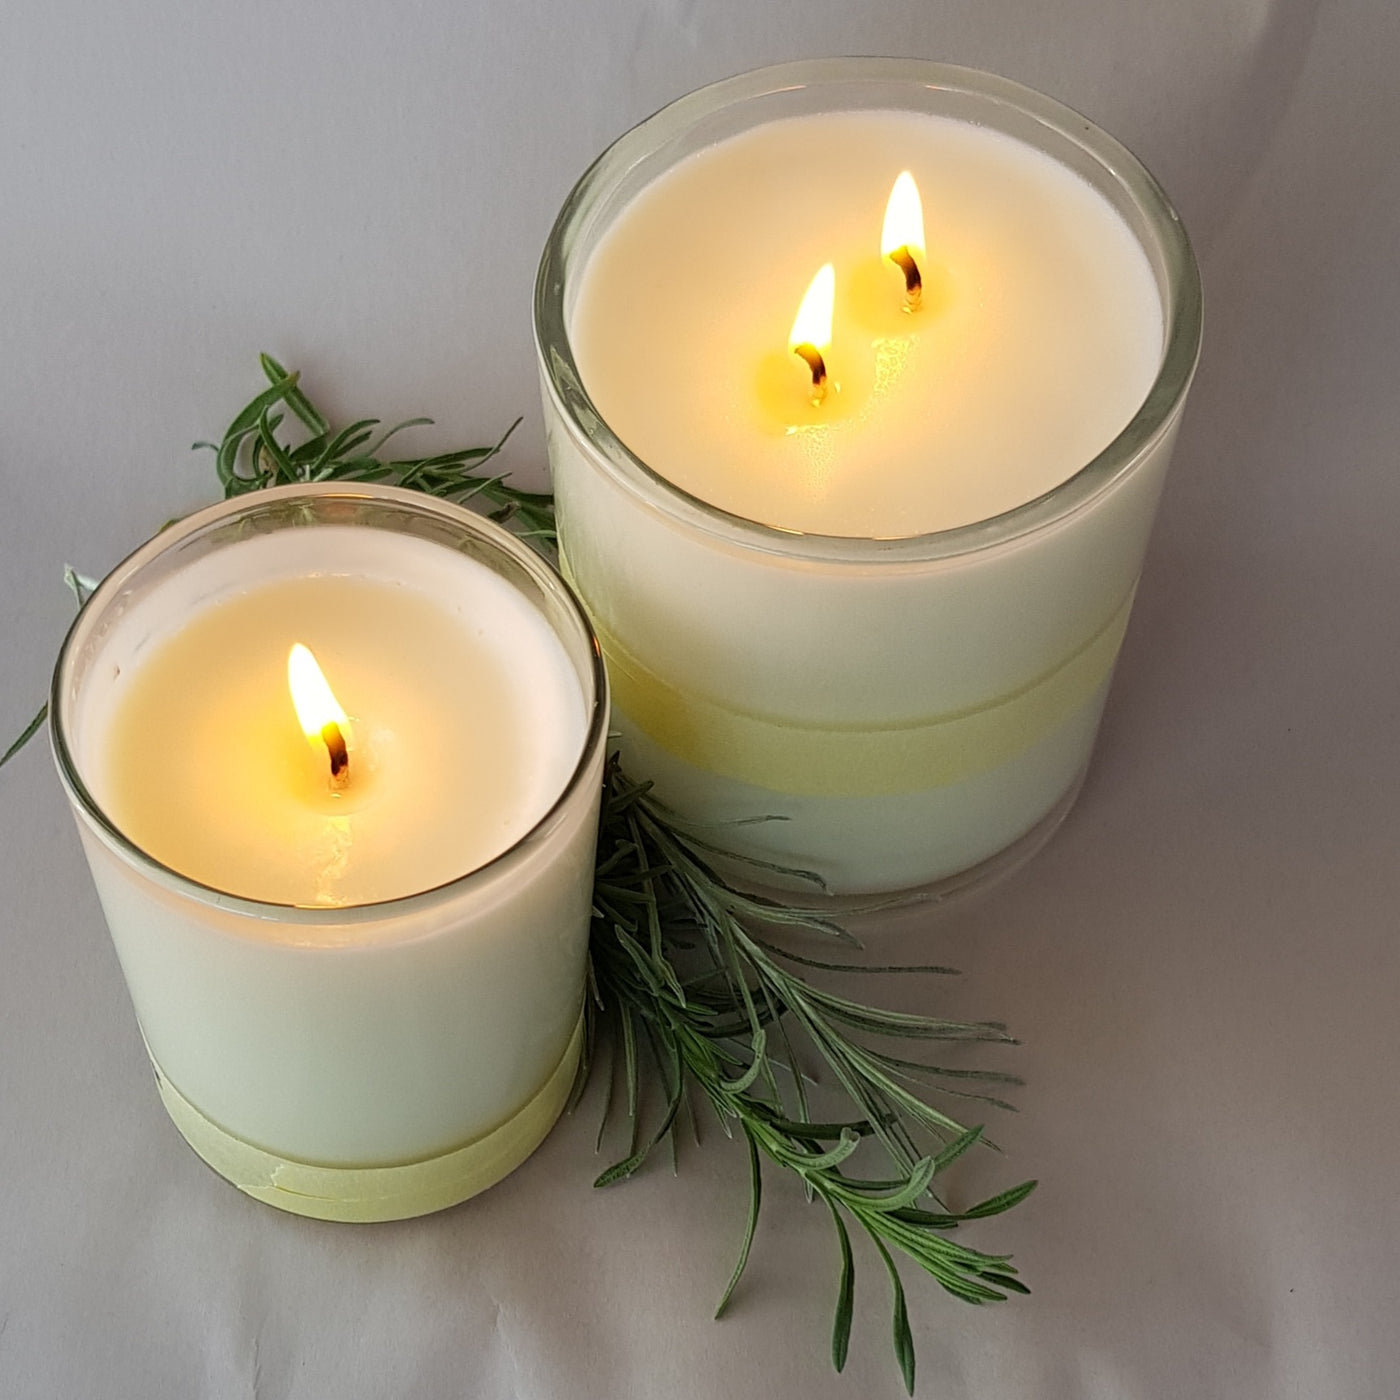 Wholesale coconut wax for candle making To Meet All Your Candle Needs 